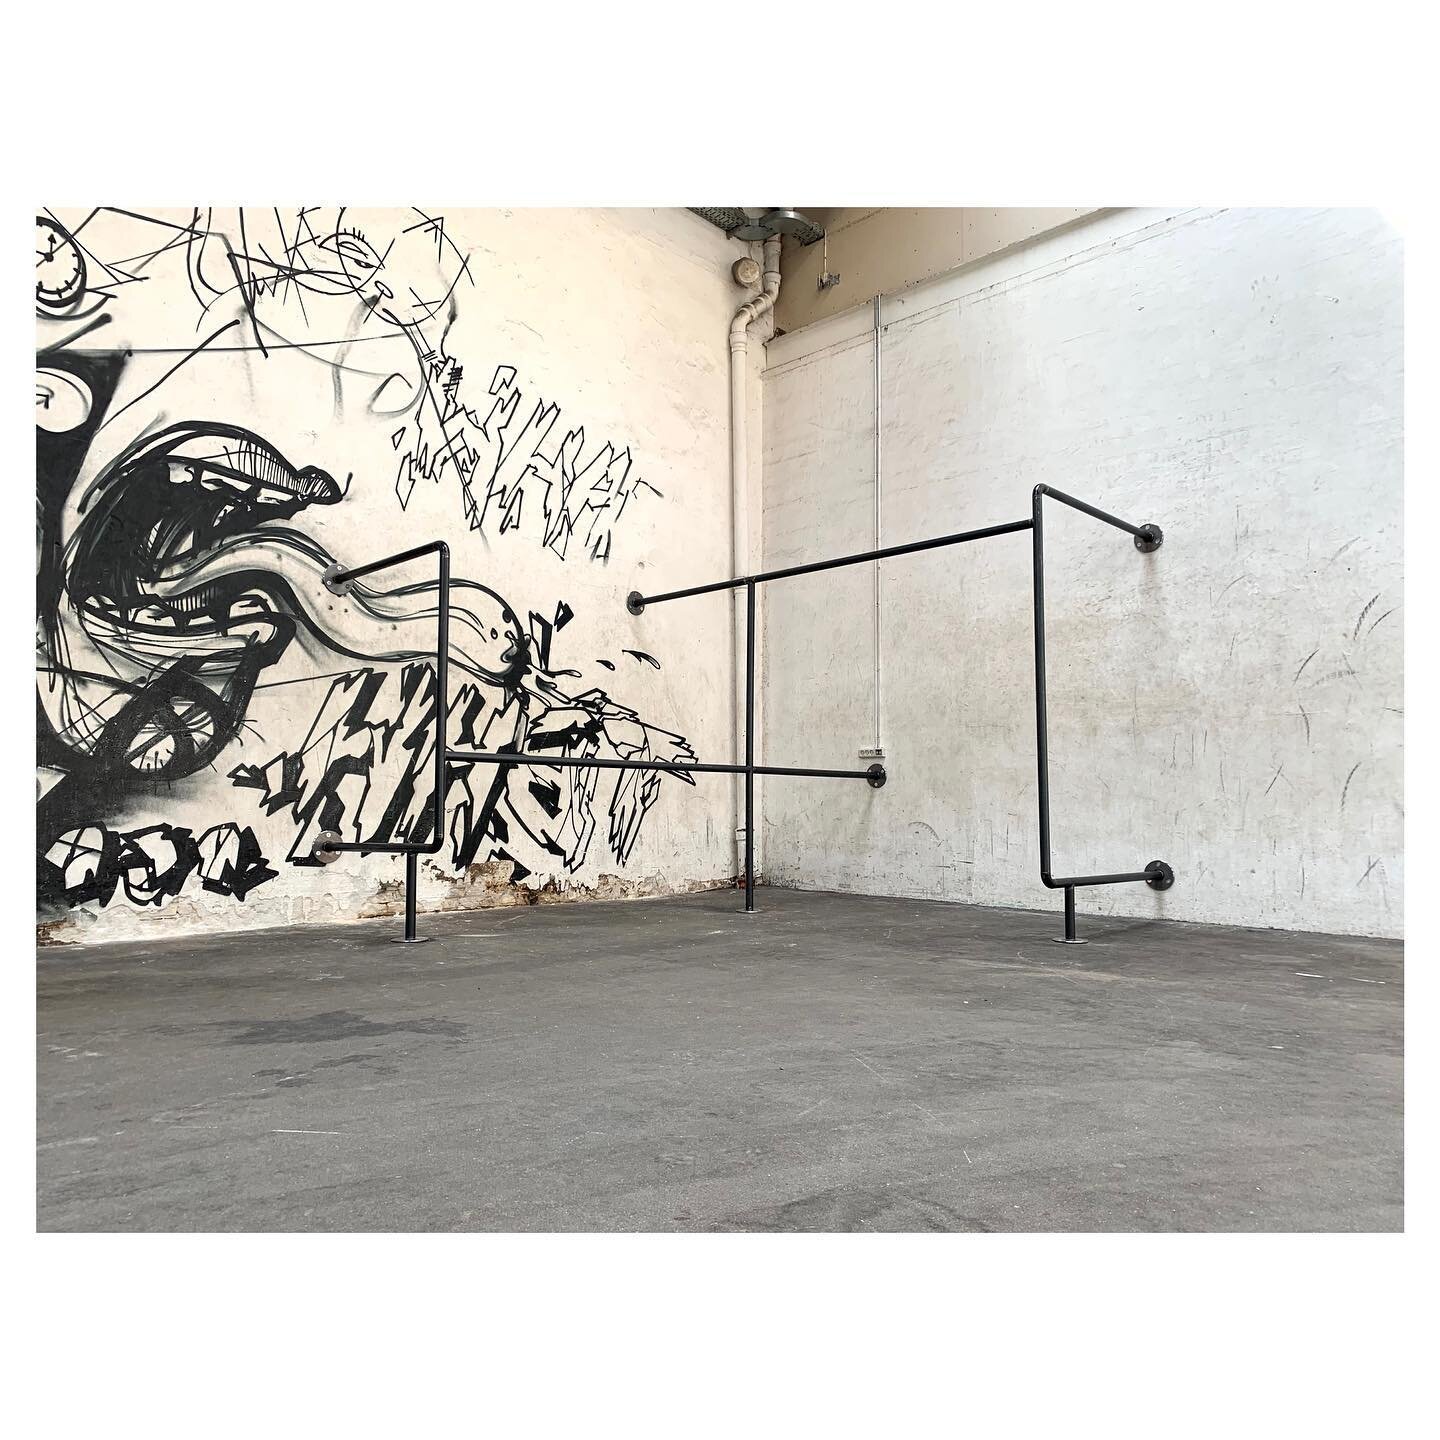 Fun little corner upgrade within the context and tight constraints of the small gym and ball court at Streetmekka CPH ✌🏽 .
.
.
#movementspace #movementarchitecture #movementdesign #sportsequipment #parkourequipment #parkourdesign #parkourgym